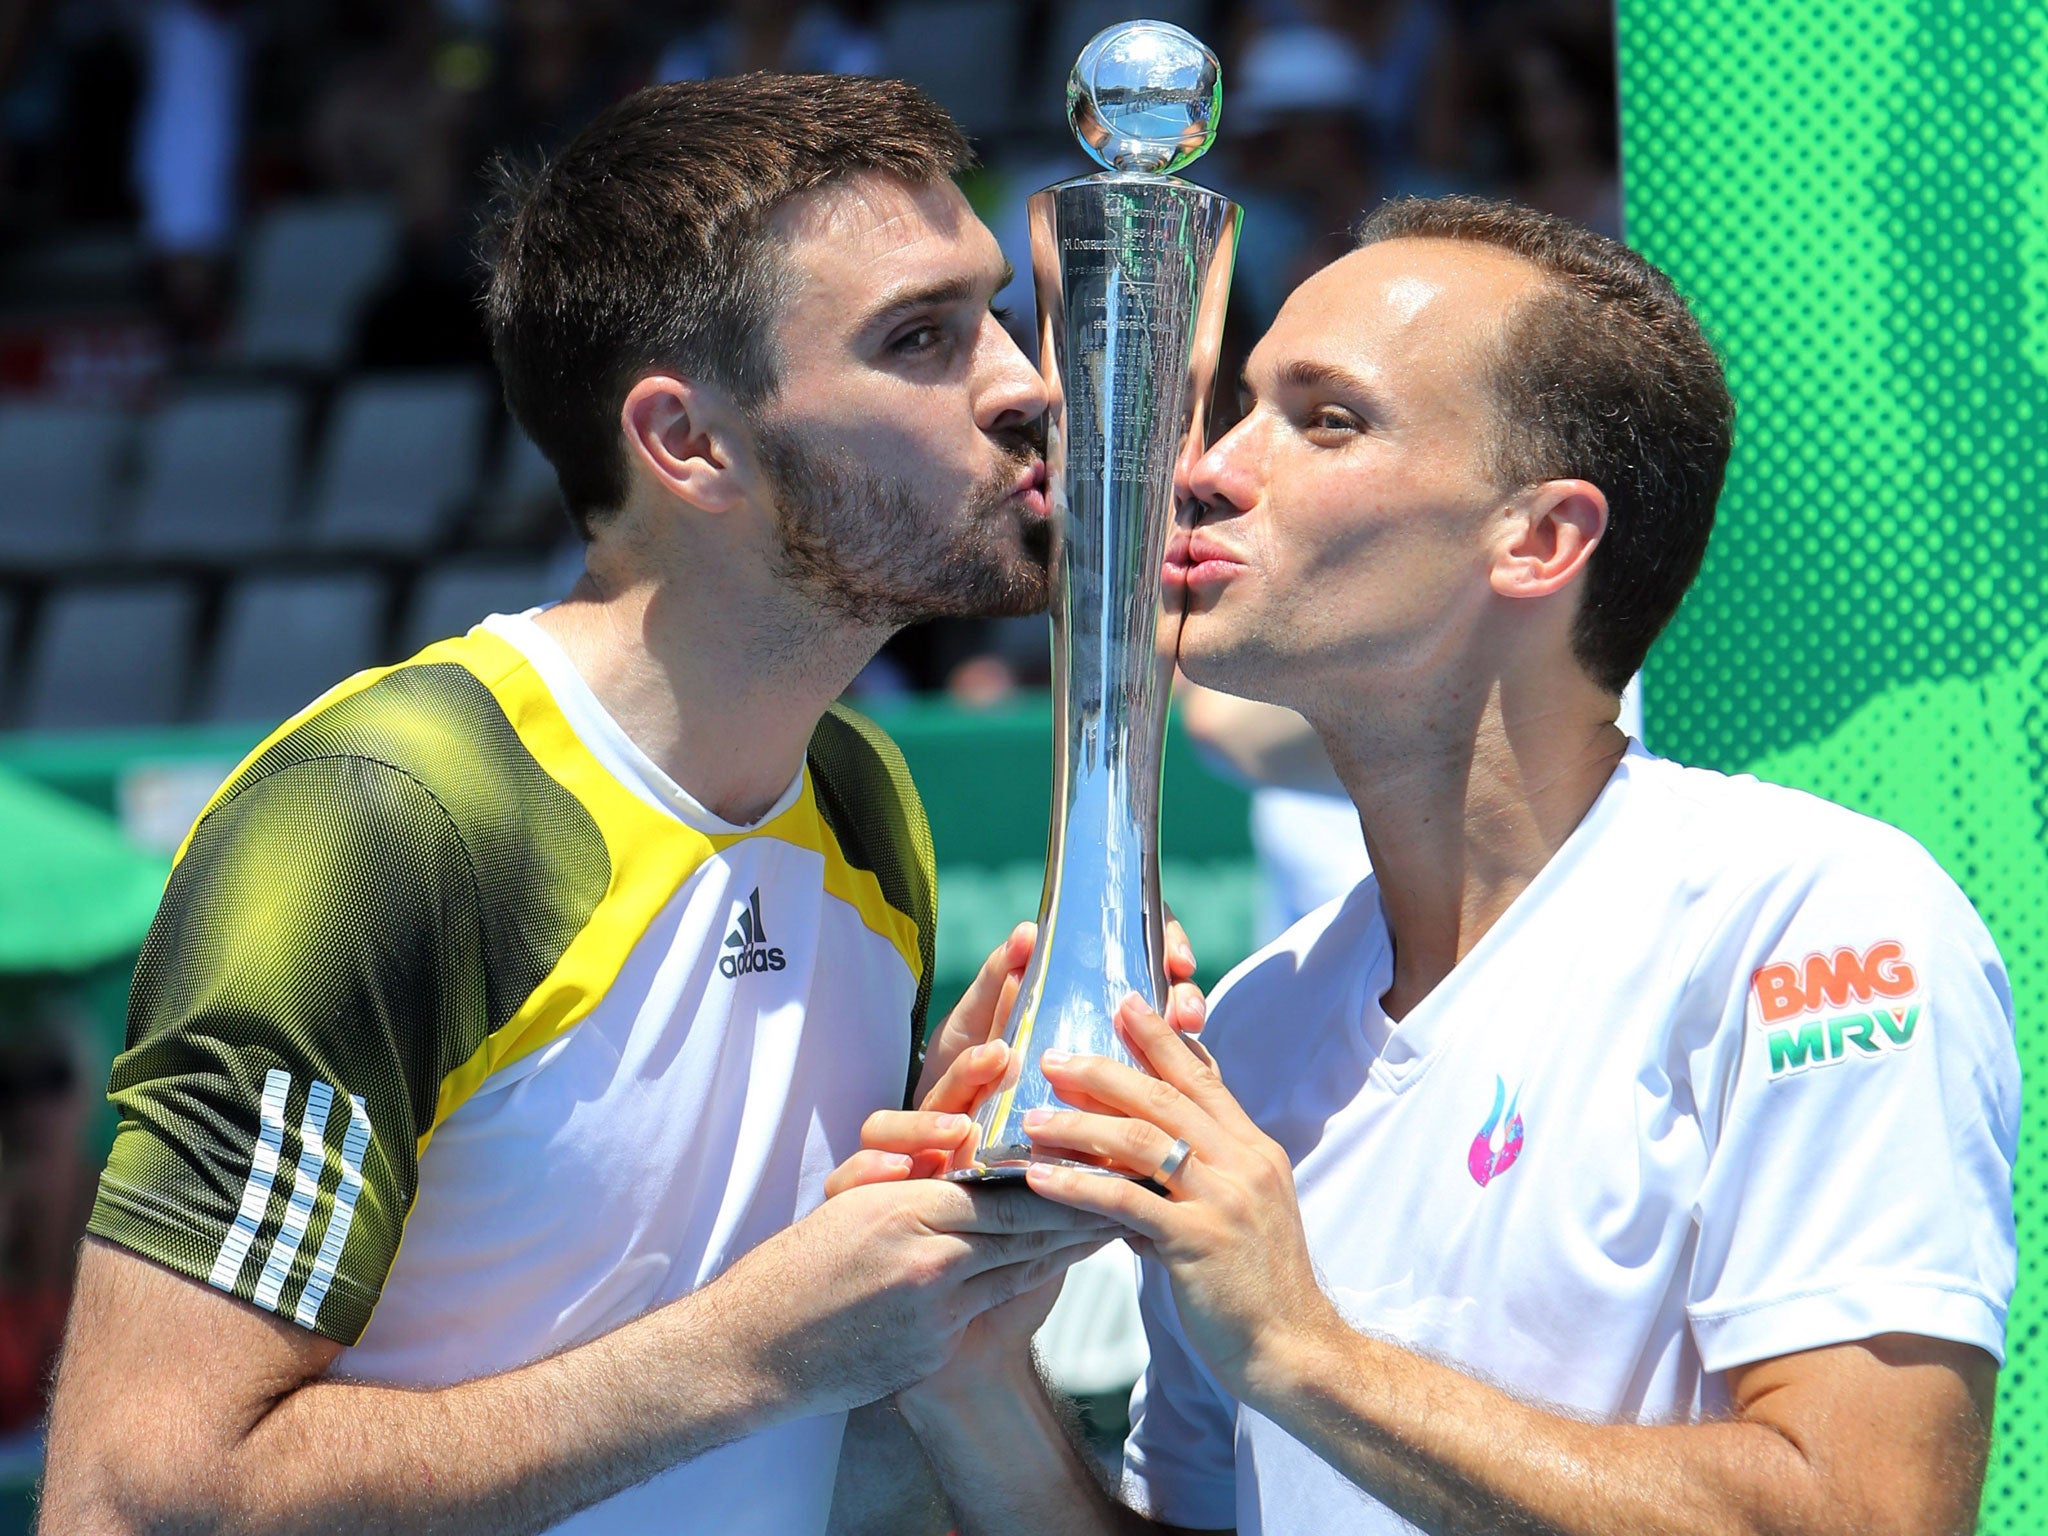 Colin Fleming won the doubles title at the Auckland Open yesterday in partnership with Bruno Soares